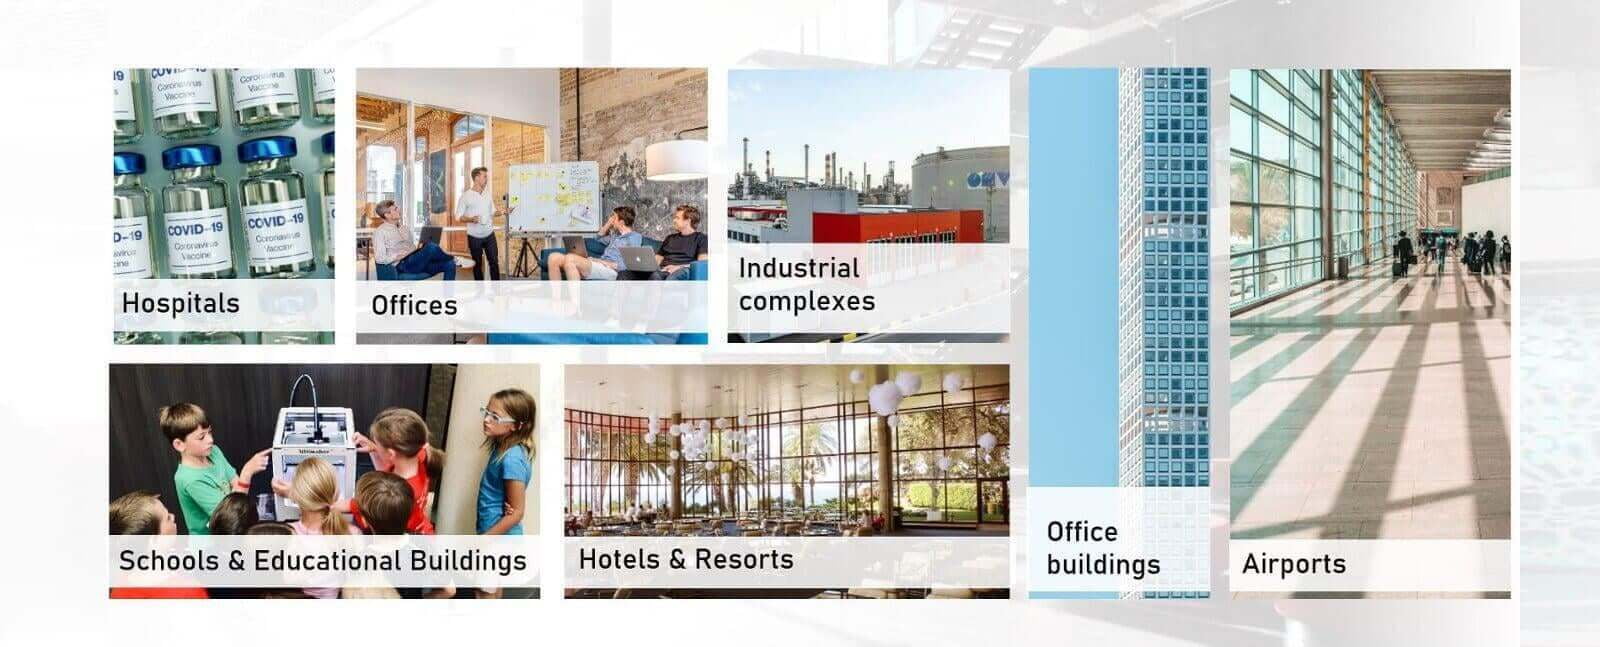 Smart Building Solutions are suited for Hospitals, Offices, Industrial complexes and factories, Schools, Hotels and Airports